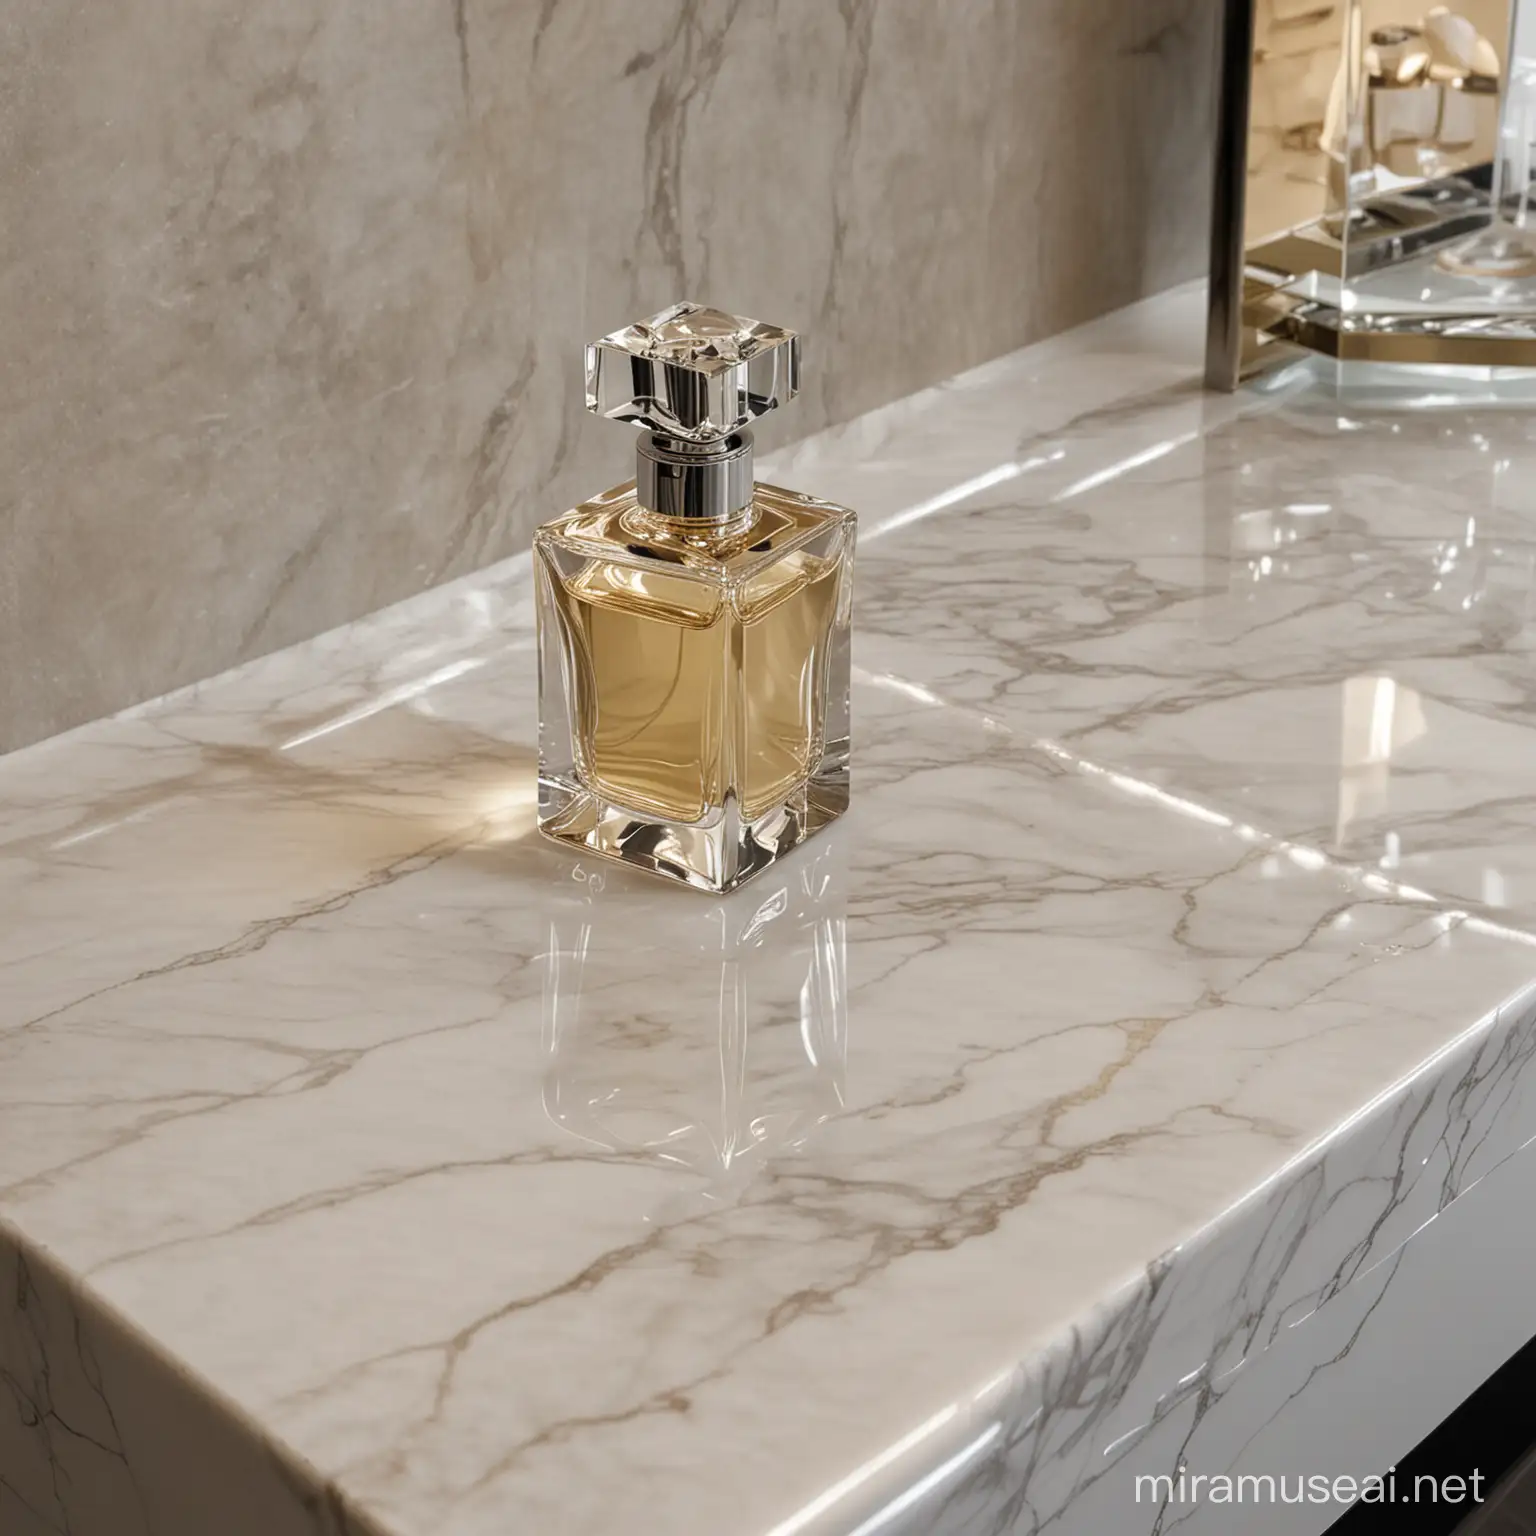 A specially designed marble countertop designed for sophisticated perfumes. Perfume bottles are to have a sophisticated crystal shape